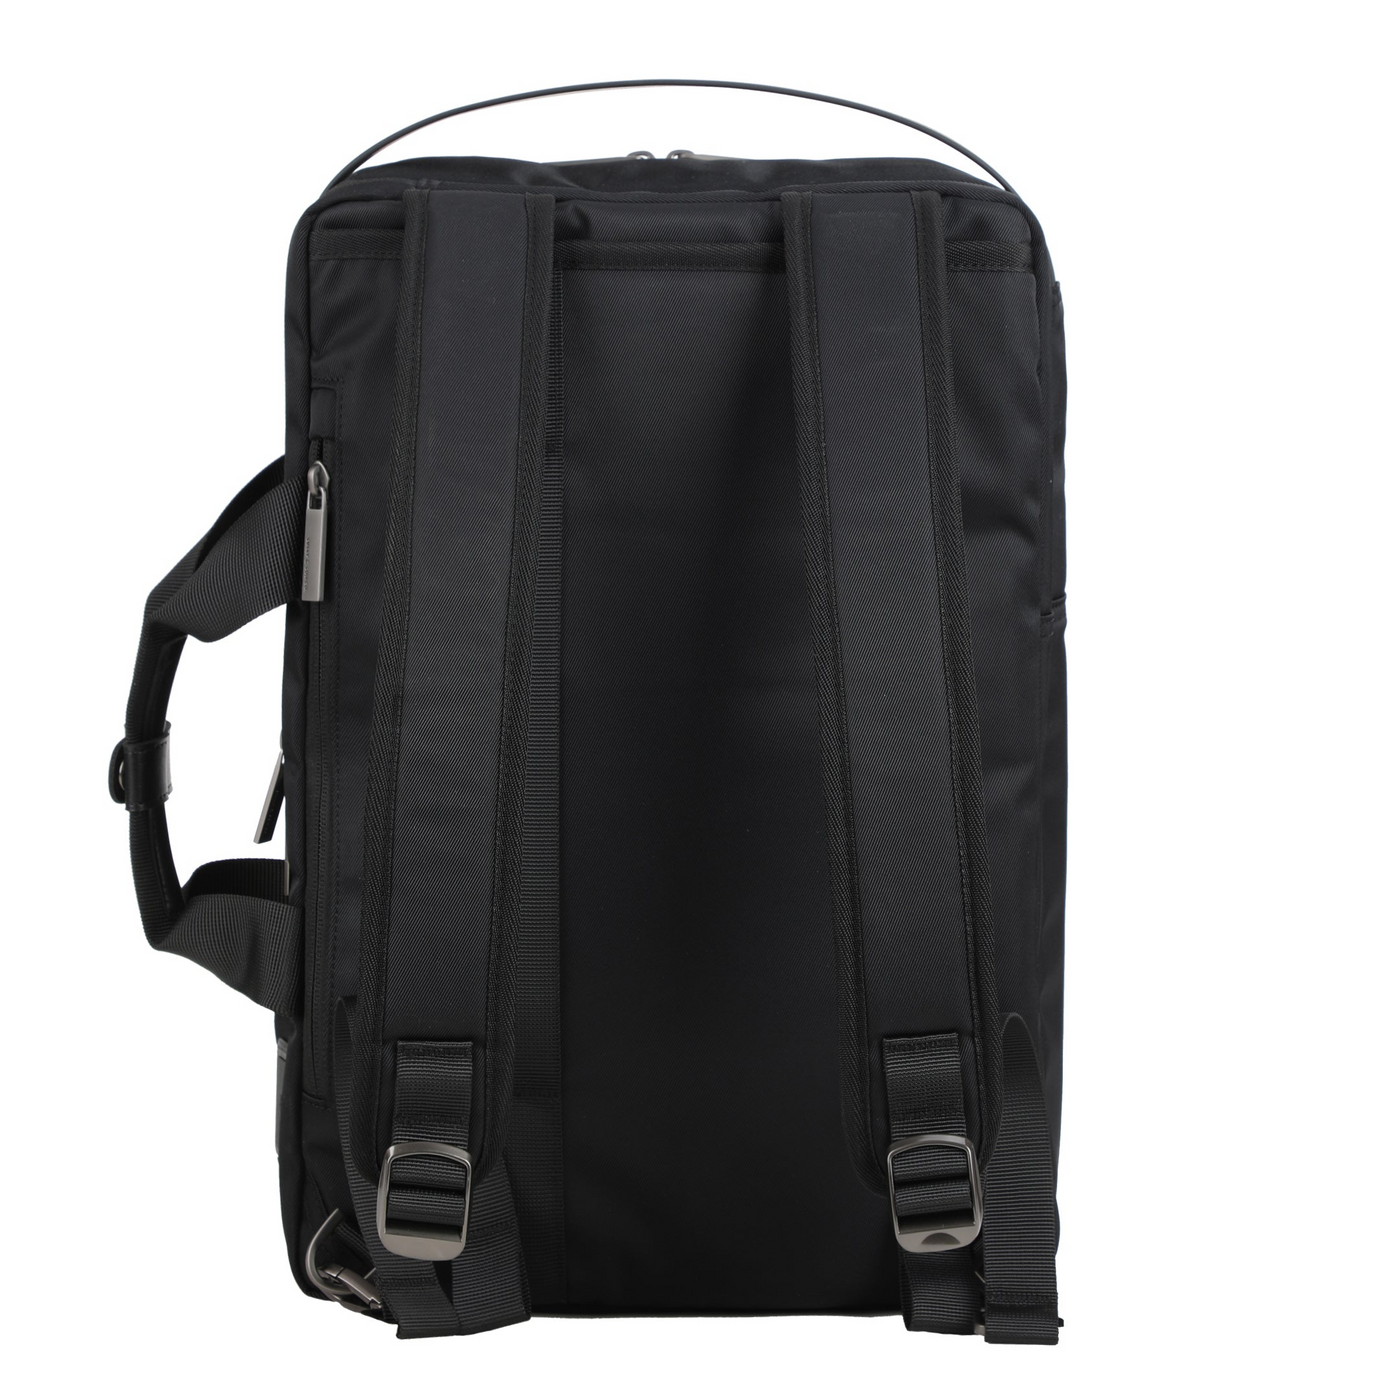 Gotstyle Fashion - Sully & Son Co. Bags Modern Briefcase / Backpack Hybrid - Black